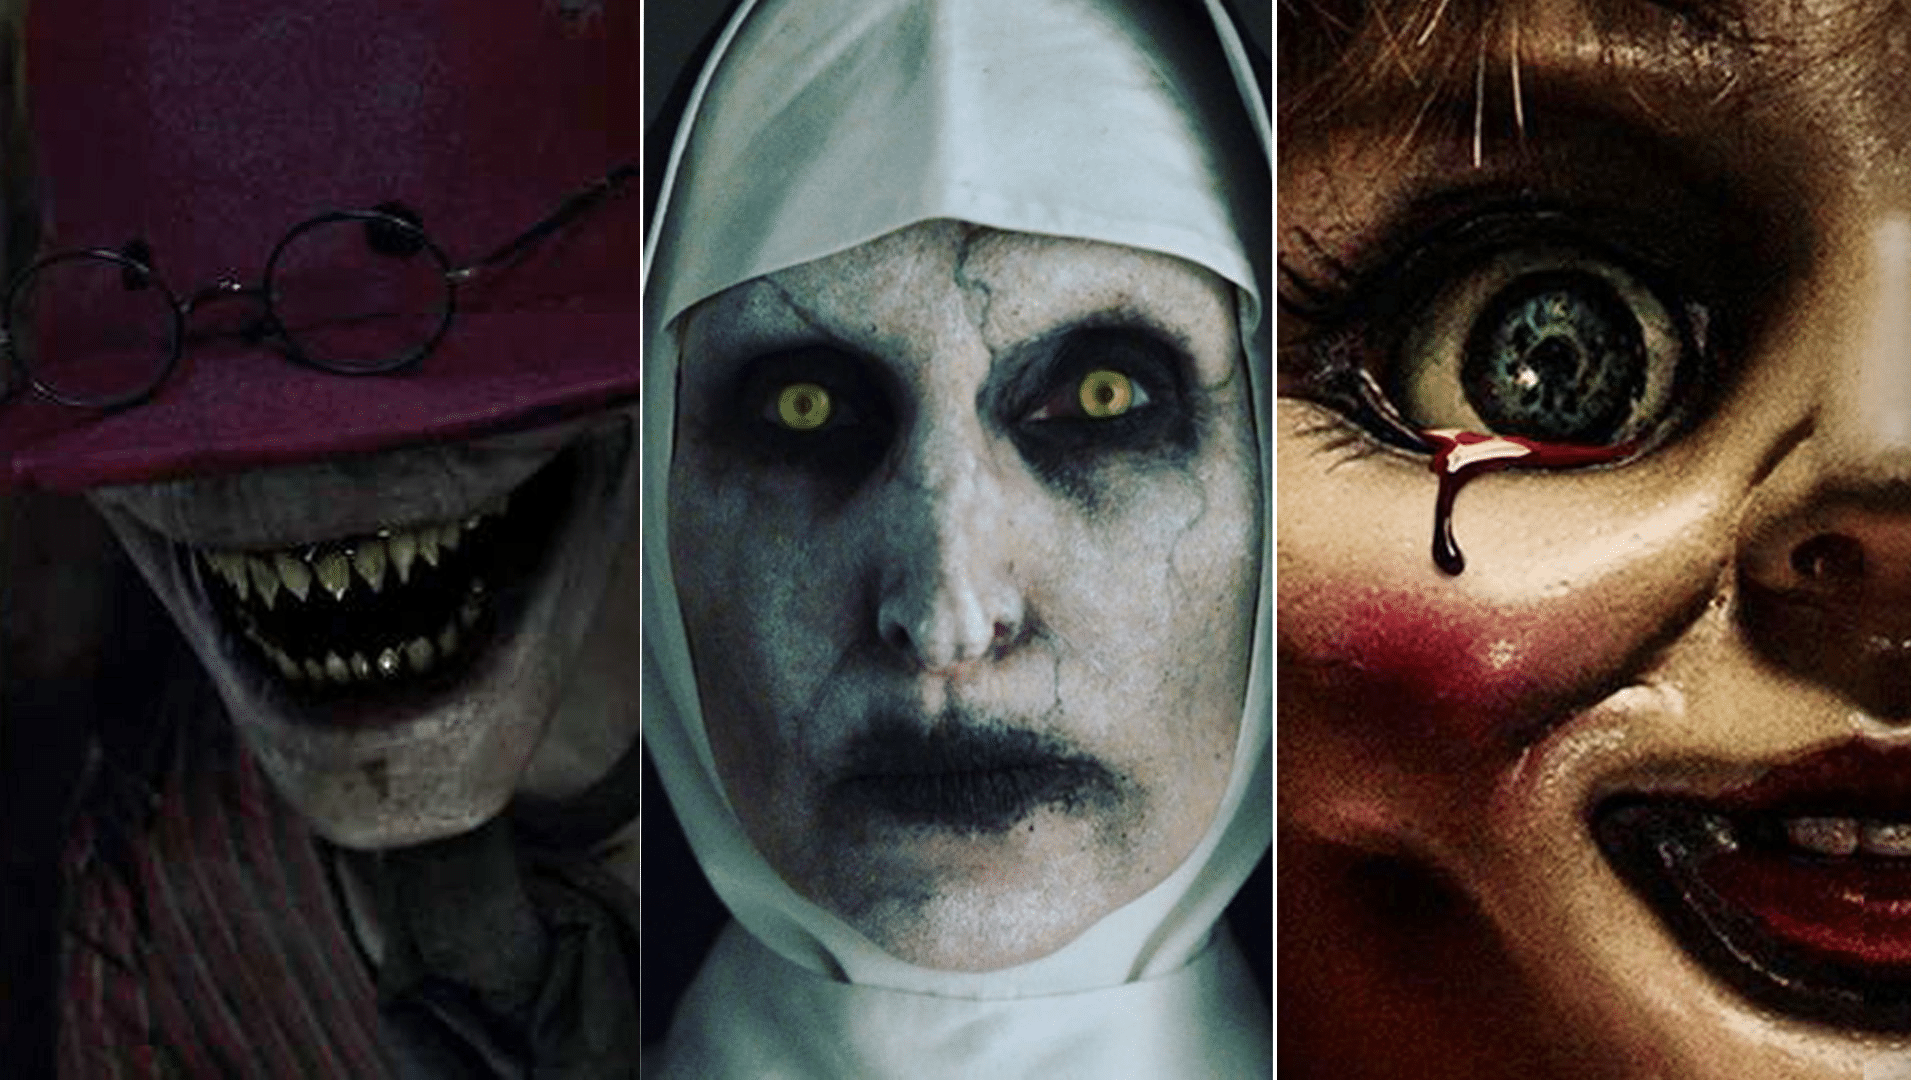 The Conjuring Universe Is The Second-Most Successful Shared Universe After MCU